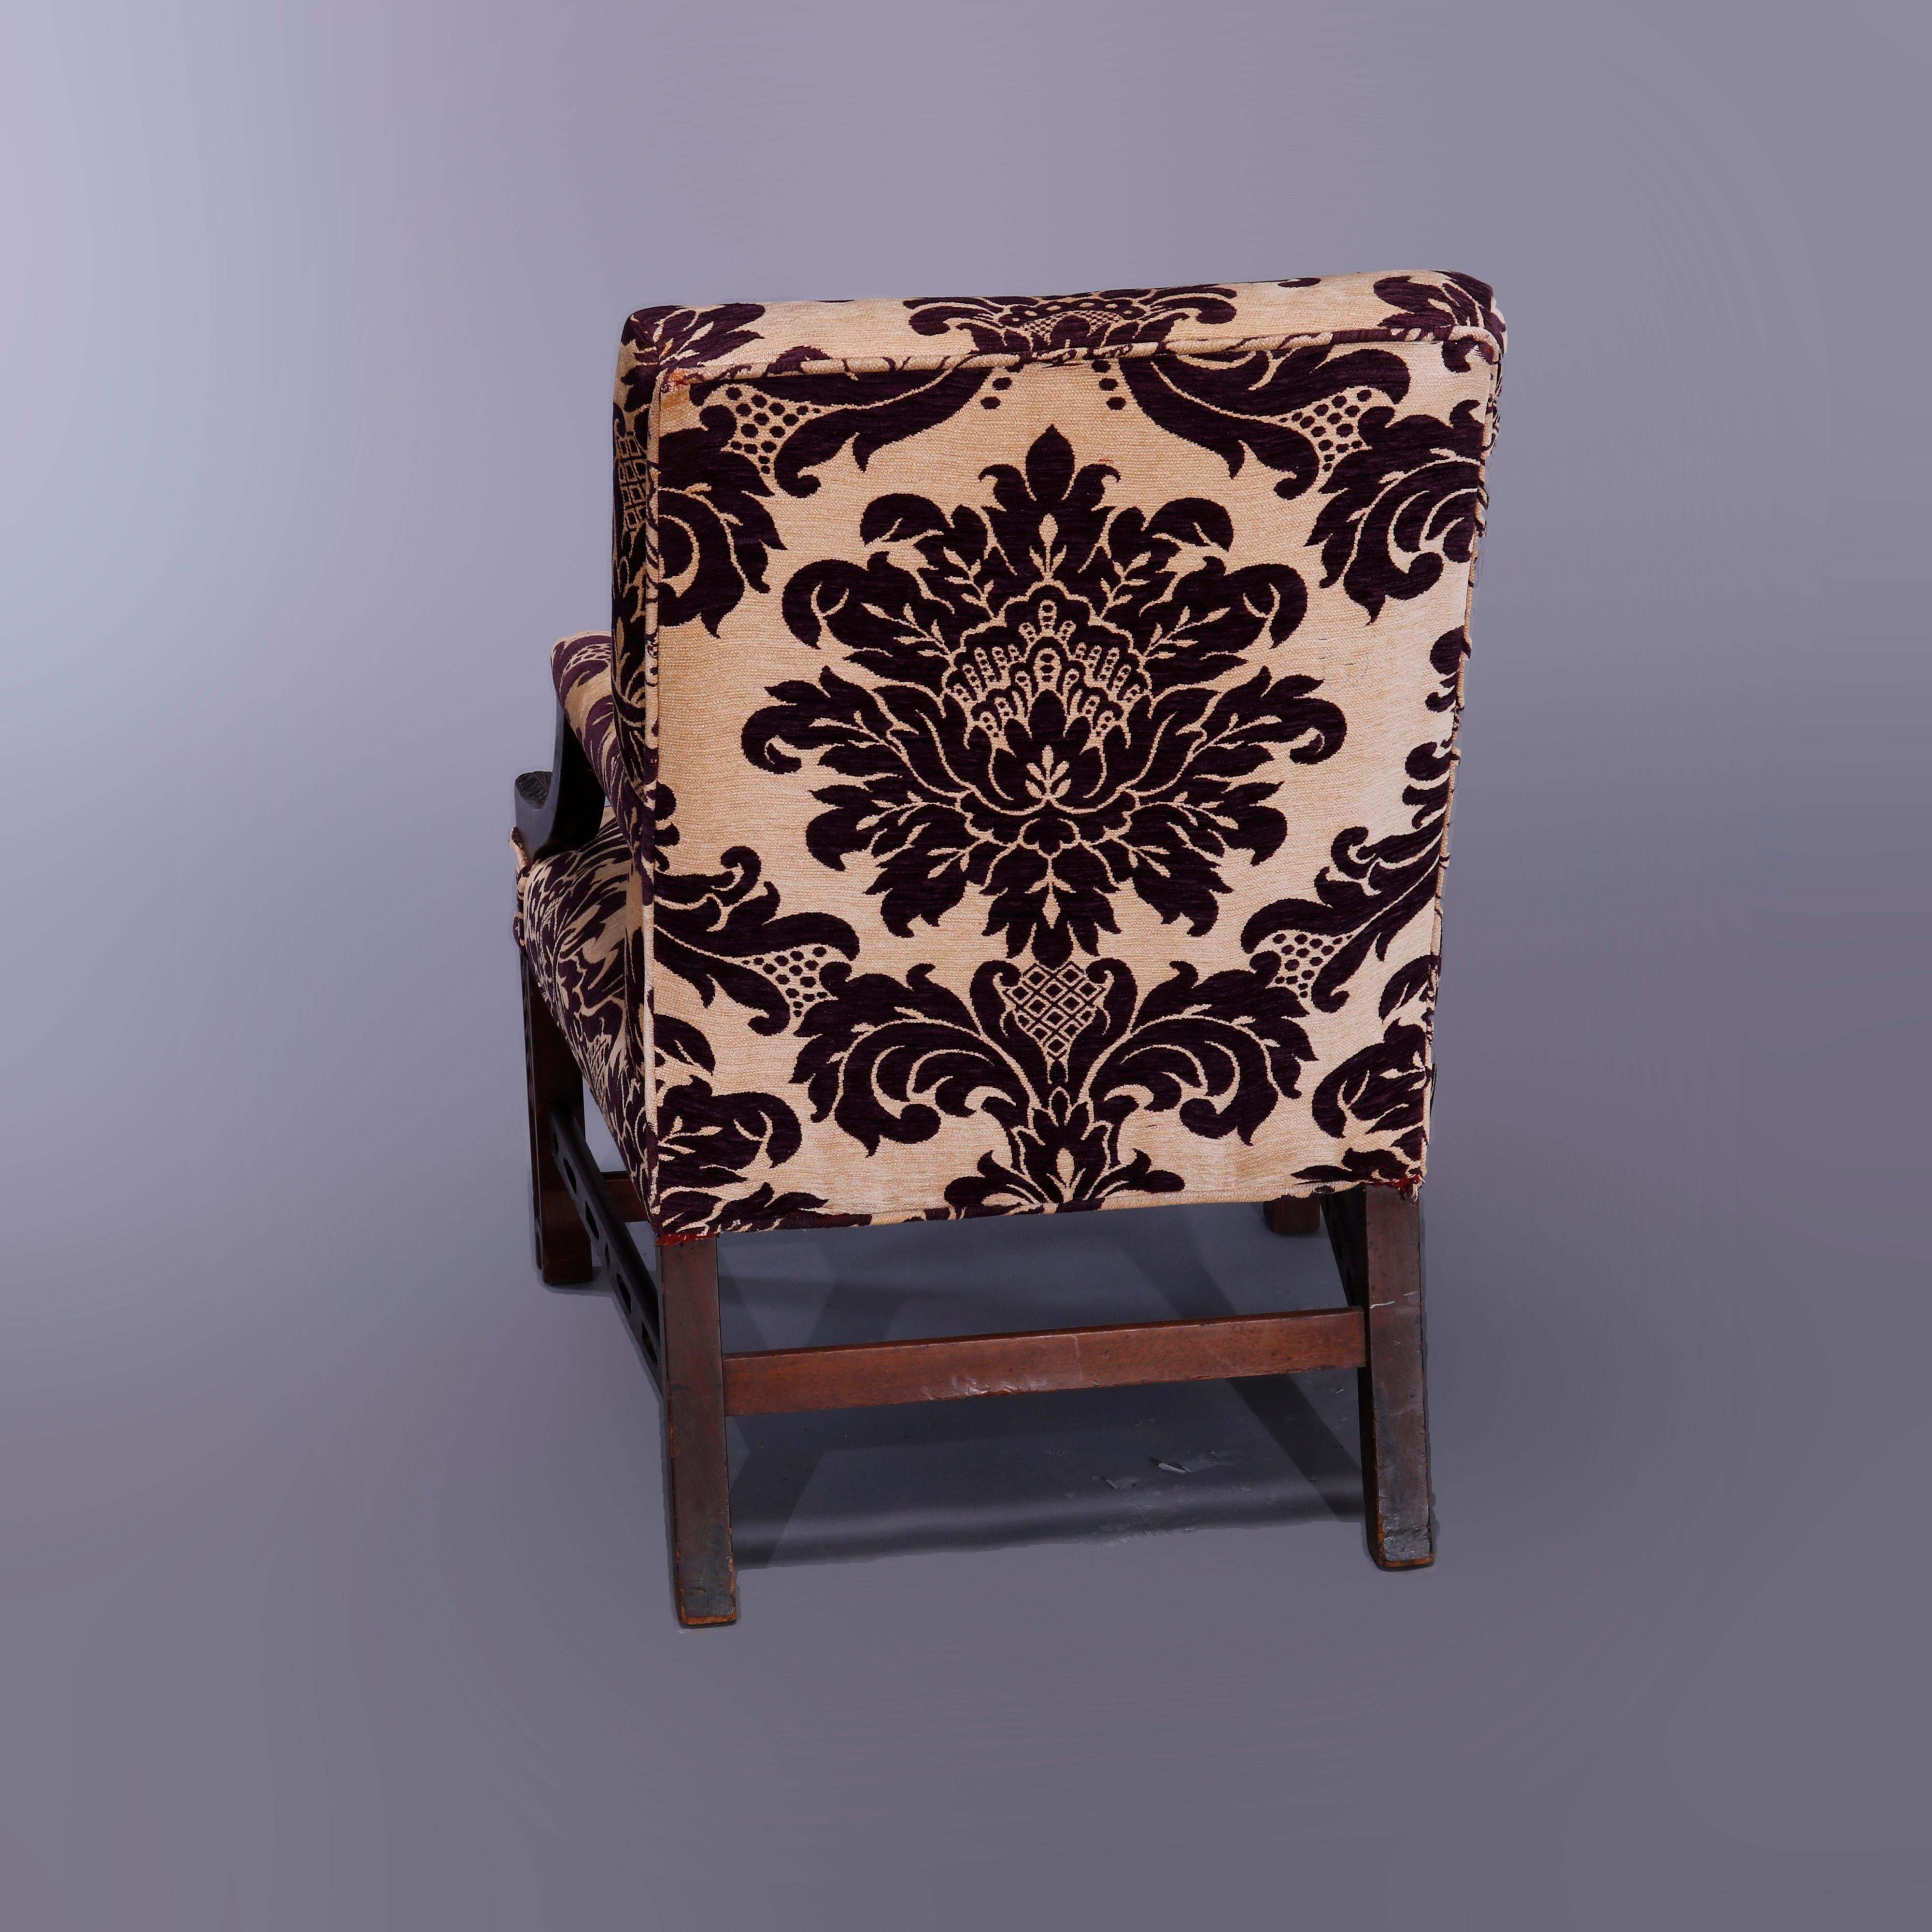 Carved Antique English Georgian Style Upholstered Mahogany Lolling Chair, circa 1920